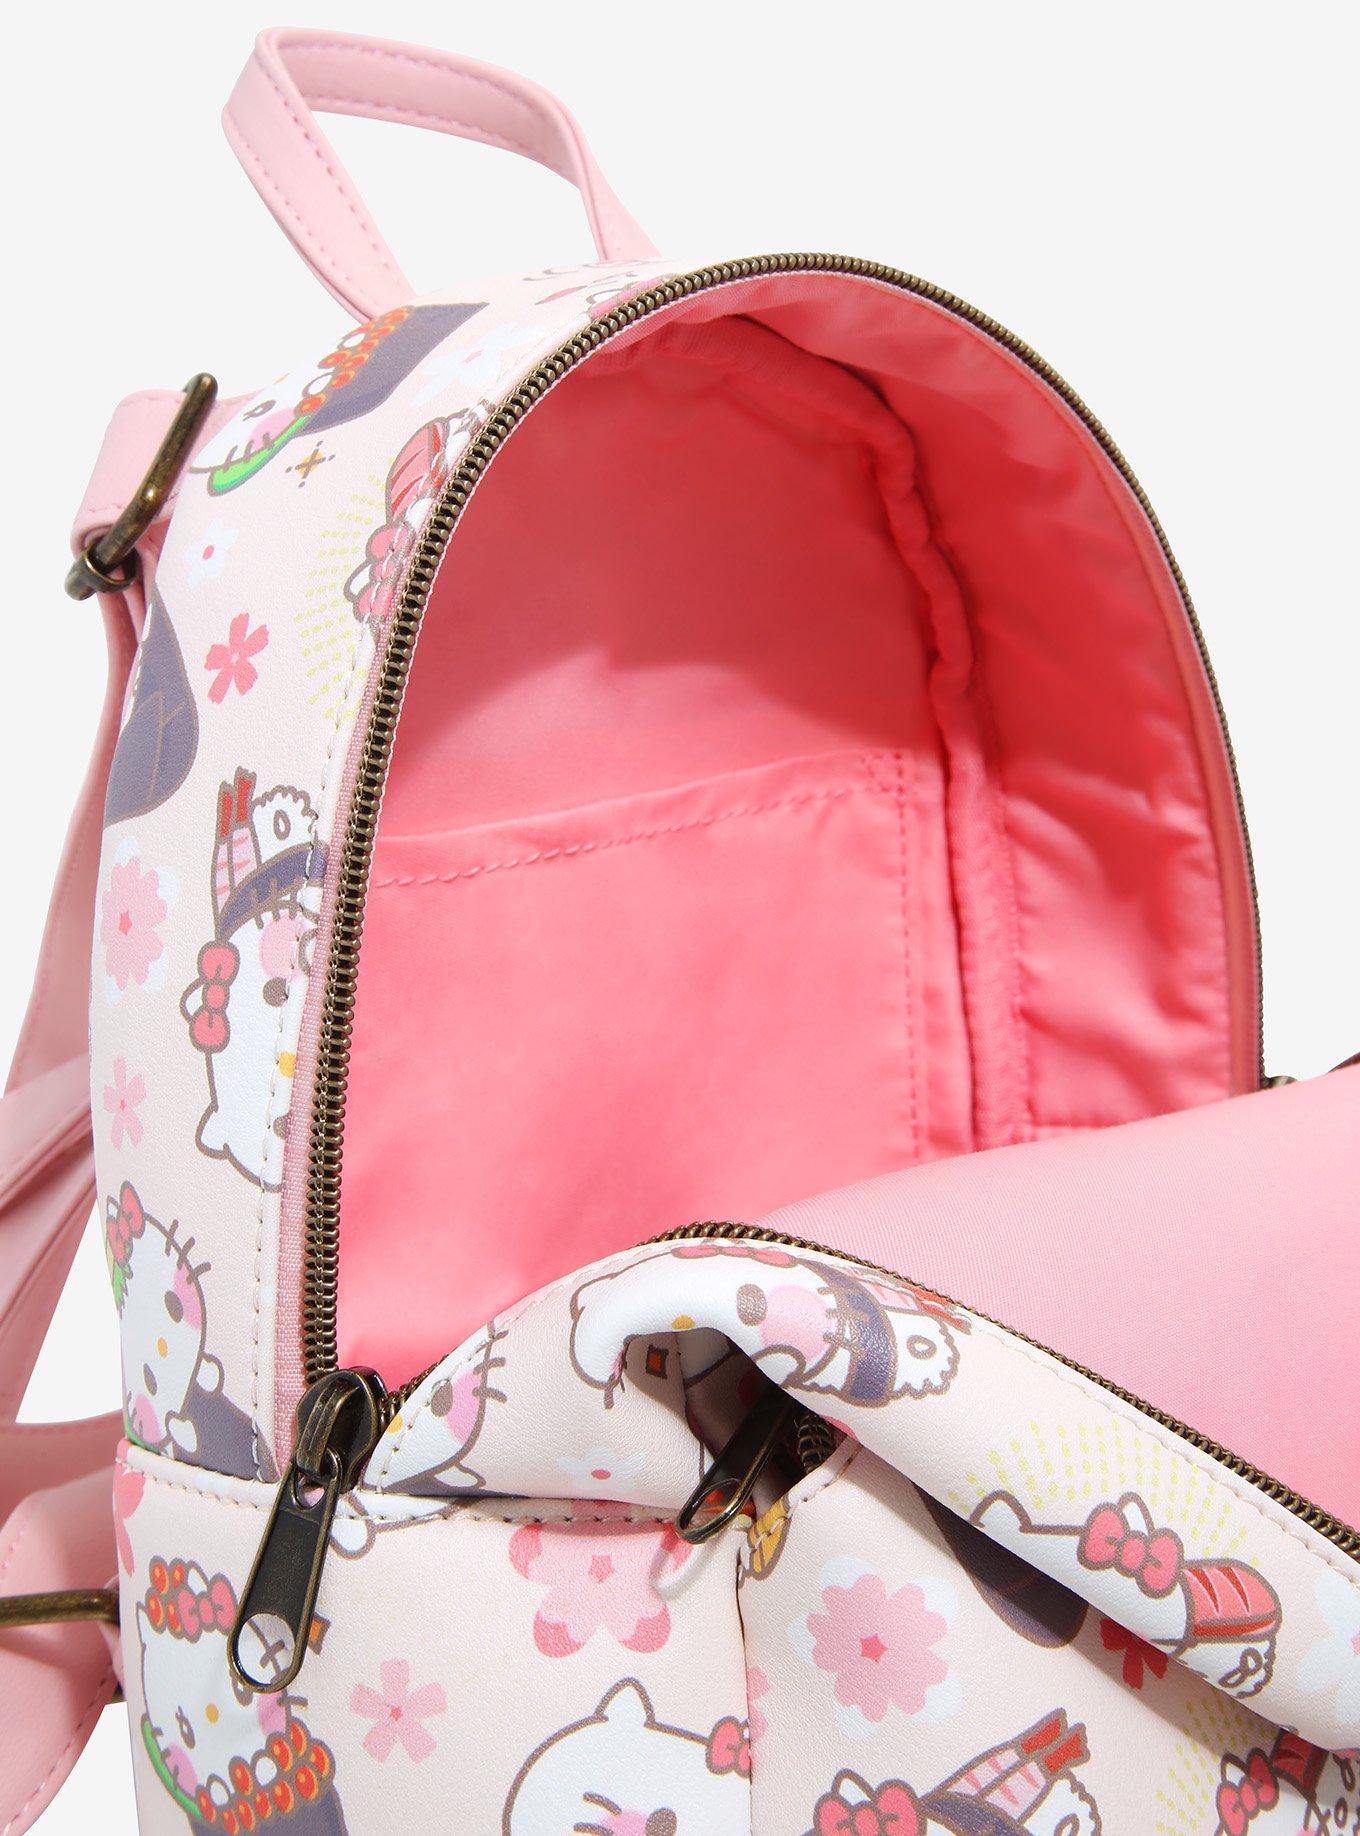 Loungefly Hello Kitty Sushi Satchel Bag for Sale in Hazard, CA